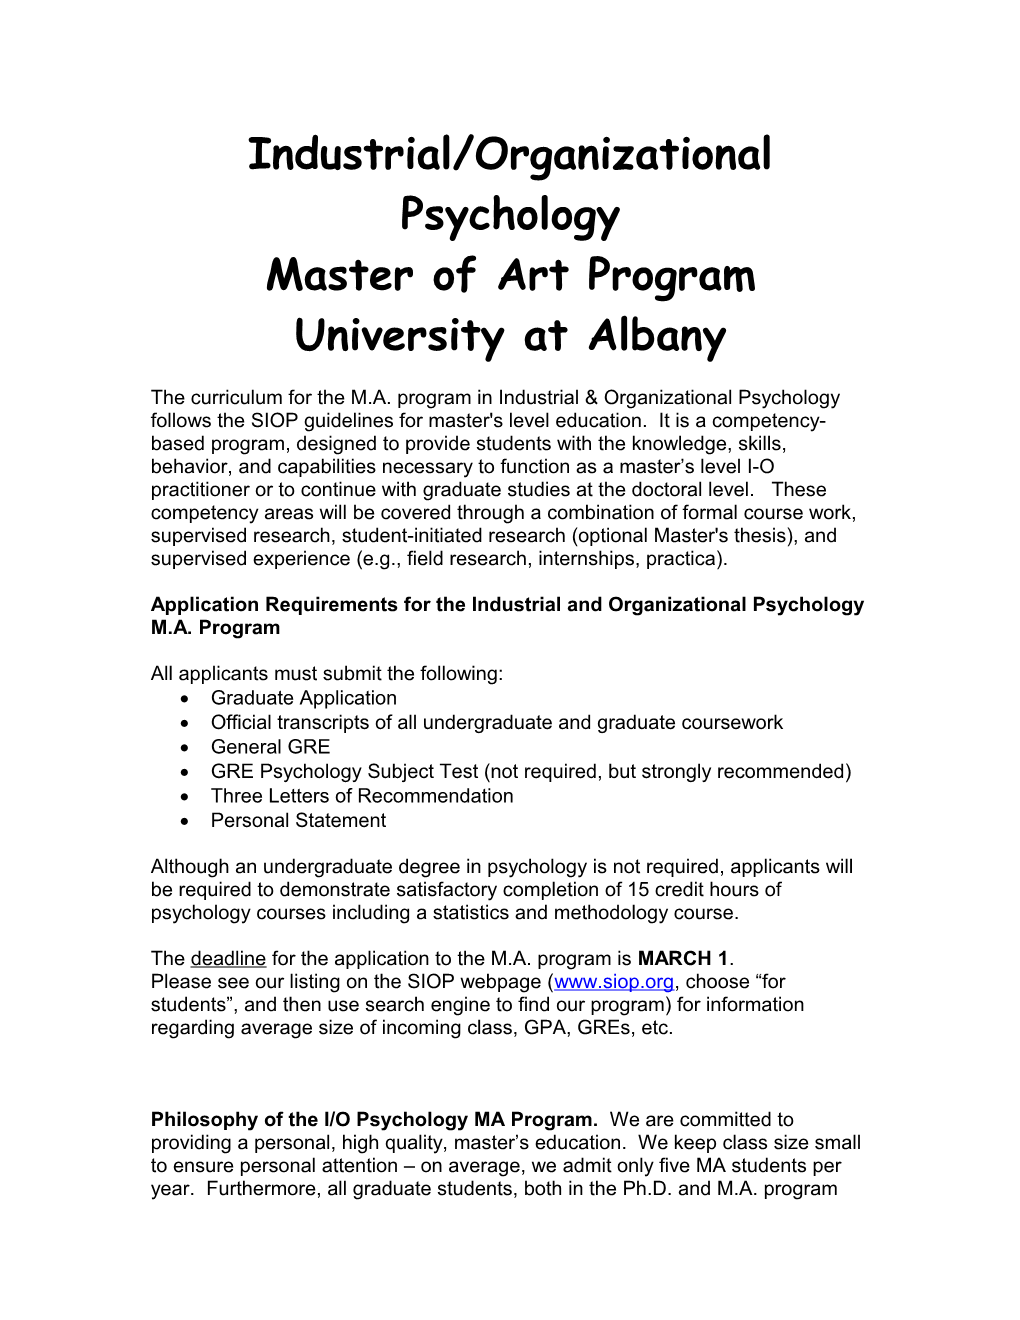 Requirements Specific to Industrial and Organizational Psychology